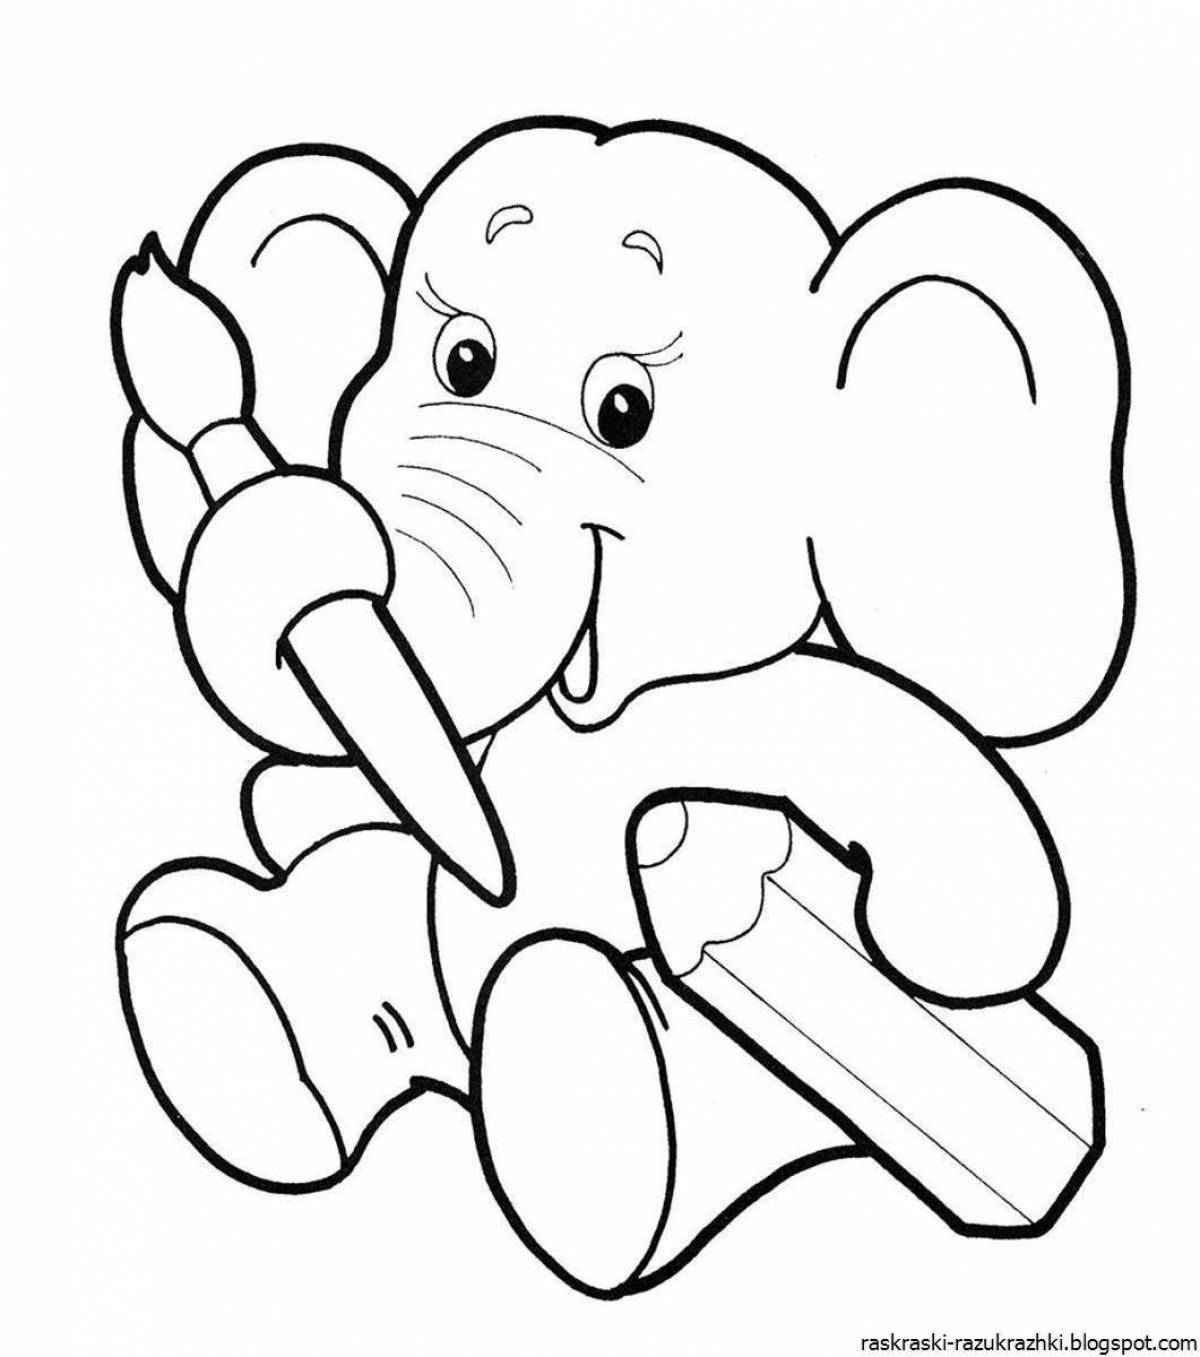 Glorious elephant coloring pages for kids